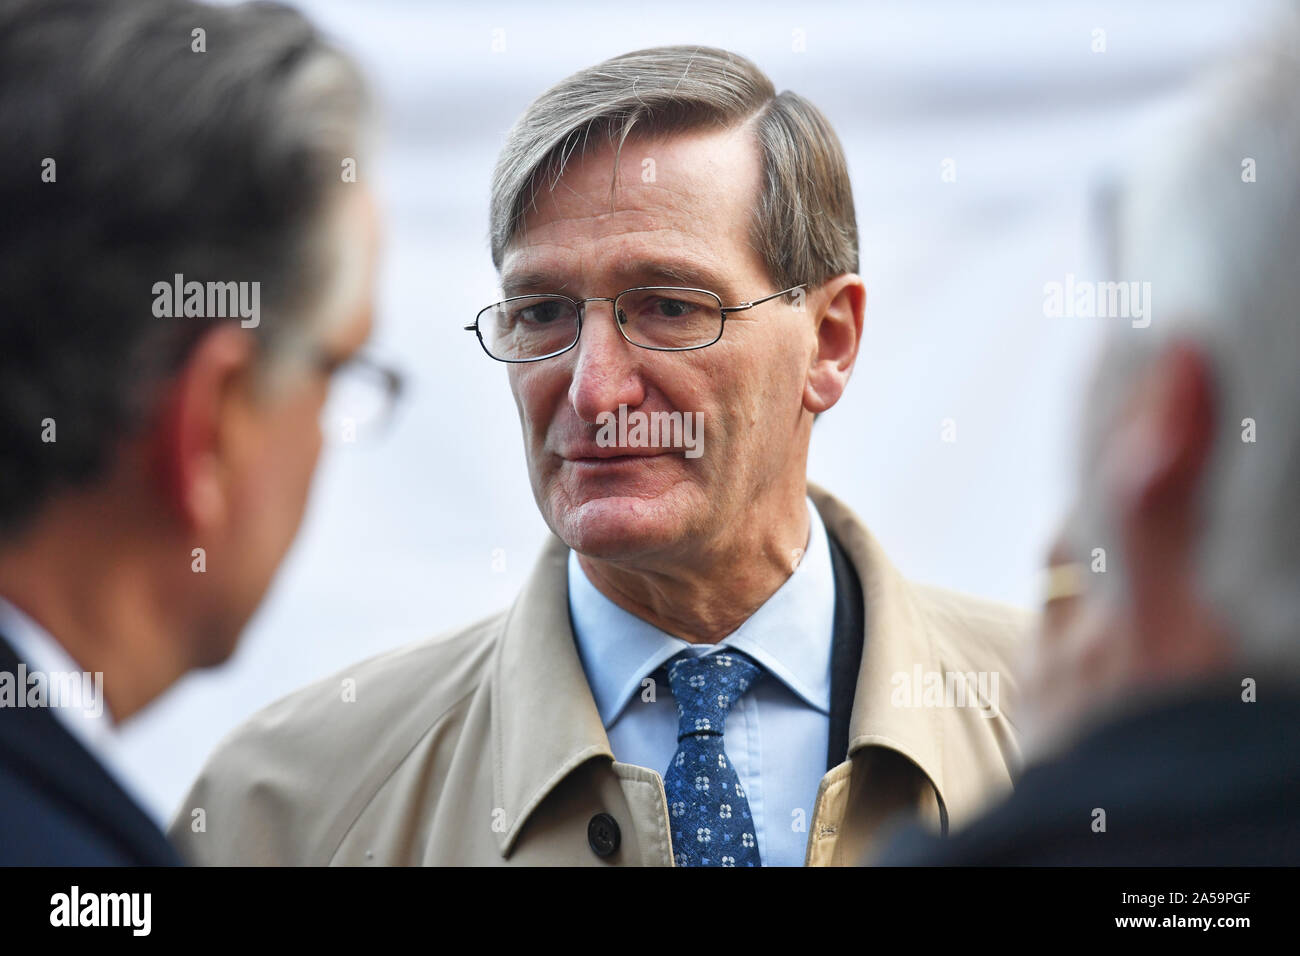 Dominic Grieve MP, who lost the Conservative whip, arrives at the Houses of Parliament in London ahead of Prime Minister Boris Johnson delivering a statement in the House of Commons on his new Brexit deal after the EU Council summit, on what has been dubbed 'Super Saturday'. Stock Photo